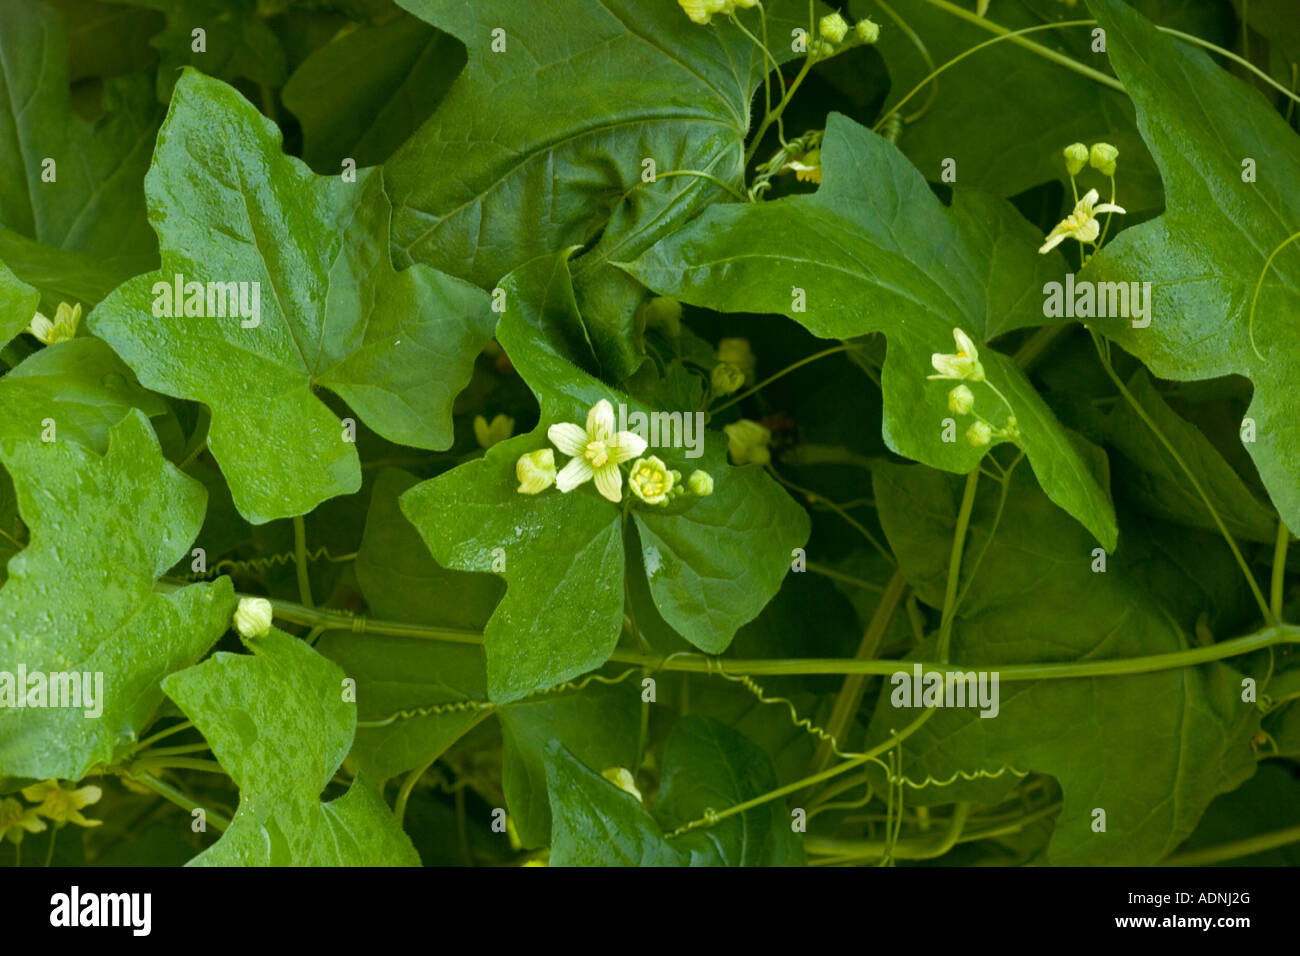 White Bryony (Bryonia dioica) in fiore, close-up Foto Stock